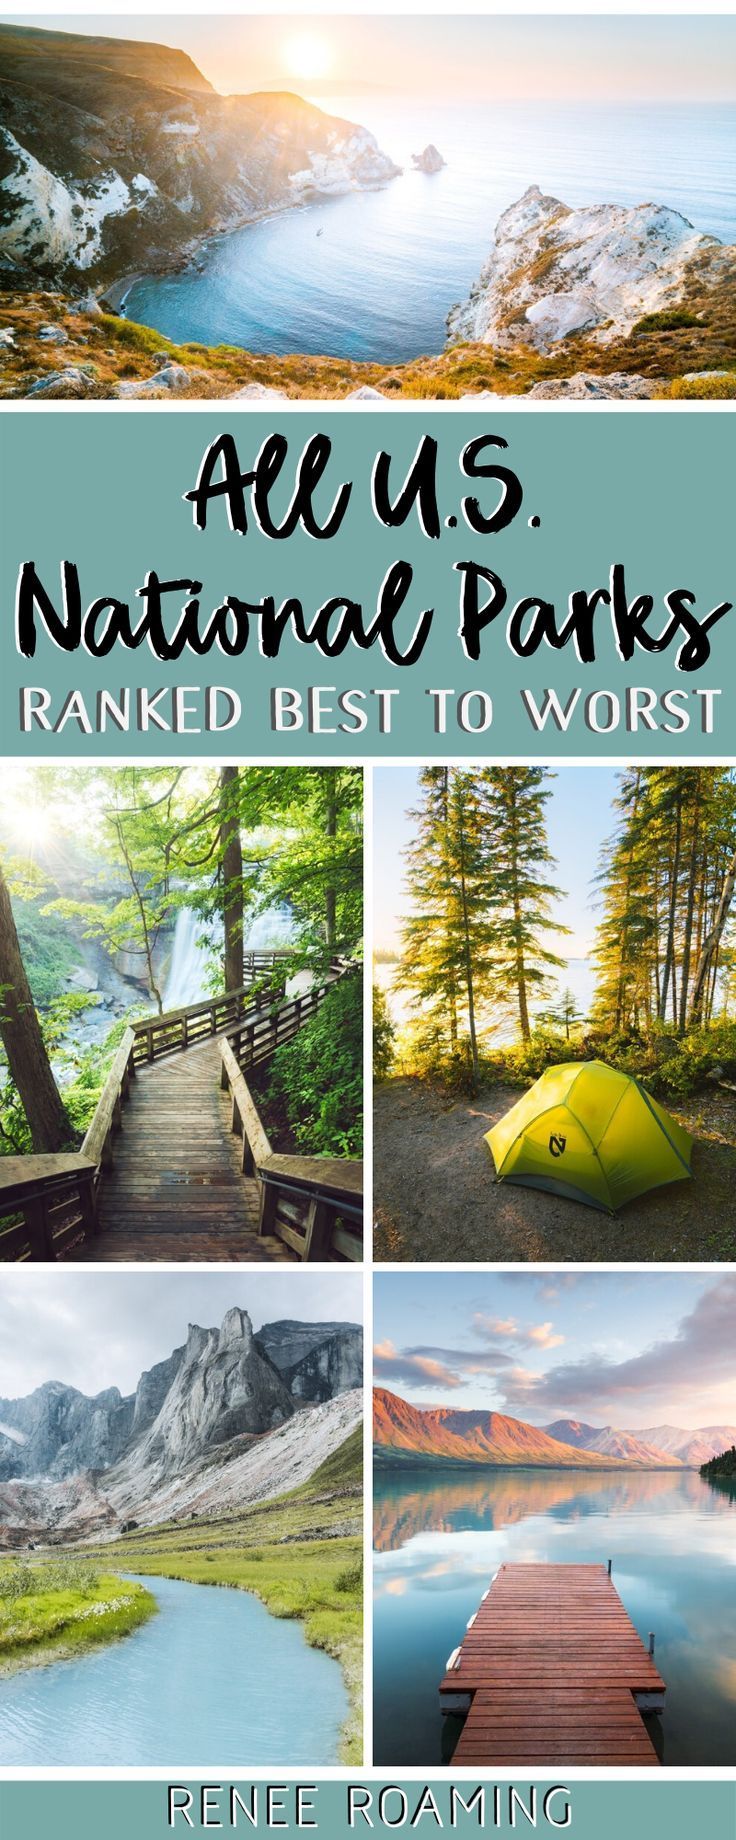 US National Parks Ranked Best To Worst - First-Hand Experience! -   19 travel destinations Budget adventure ideas